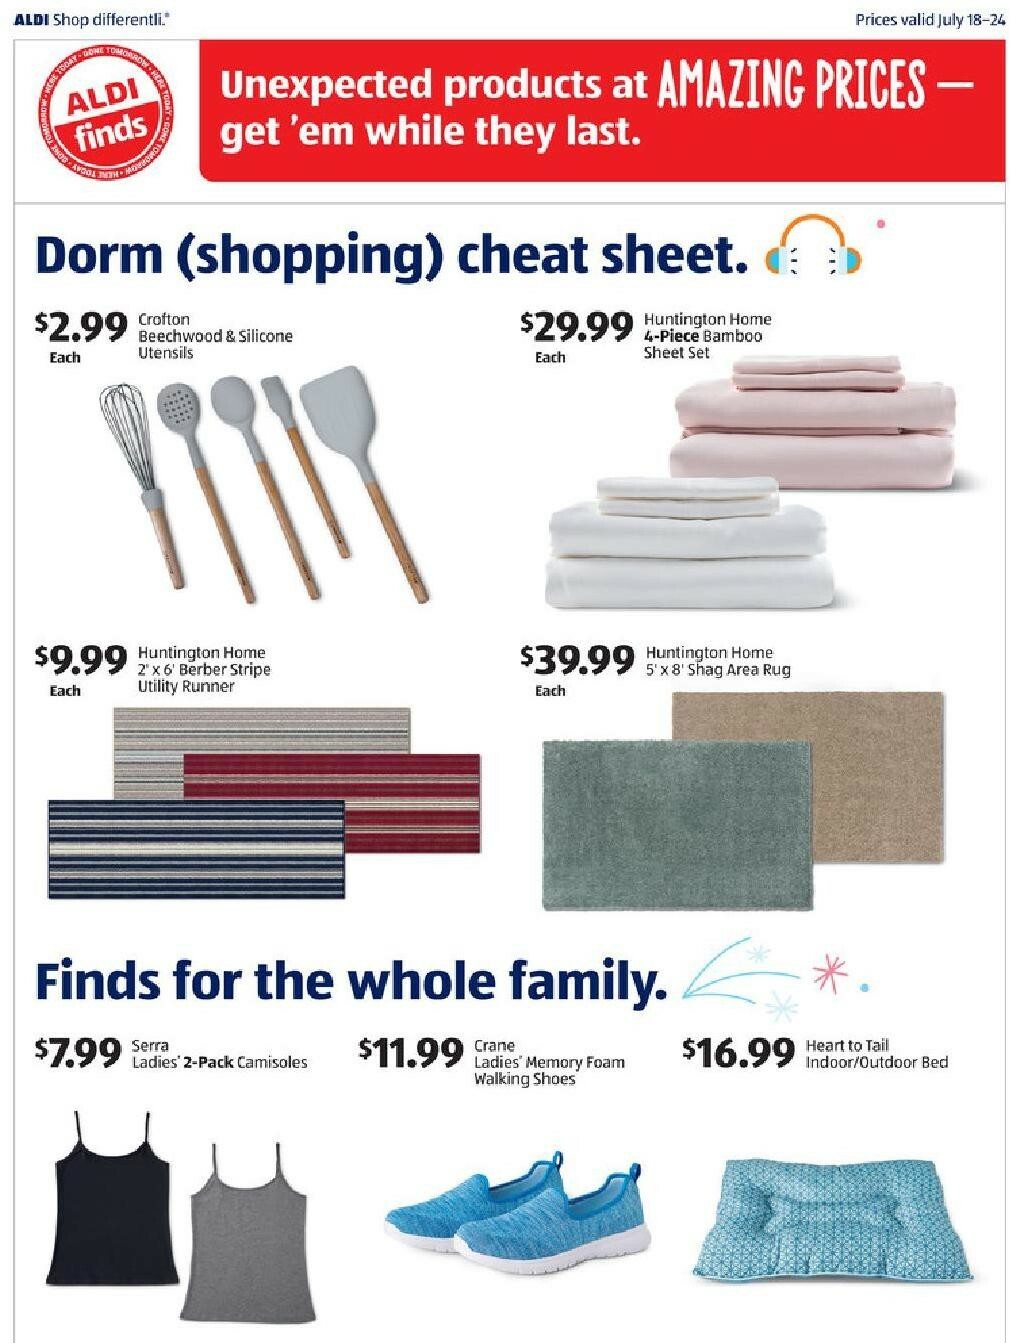 ALDI Weekly Ad from July 18